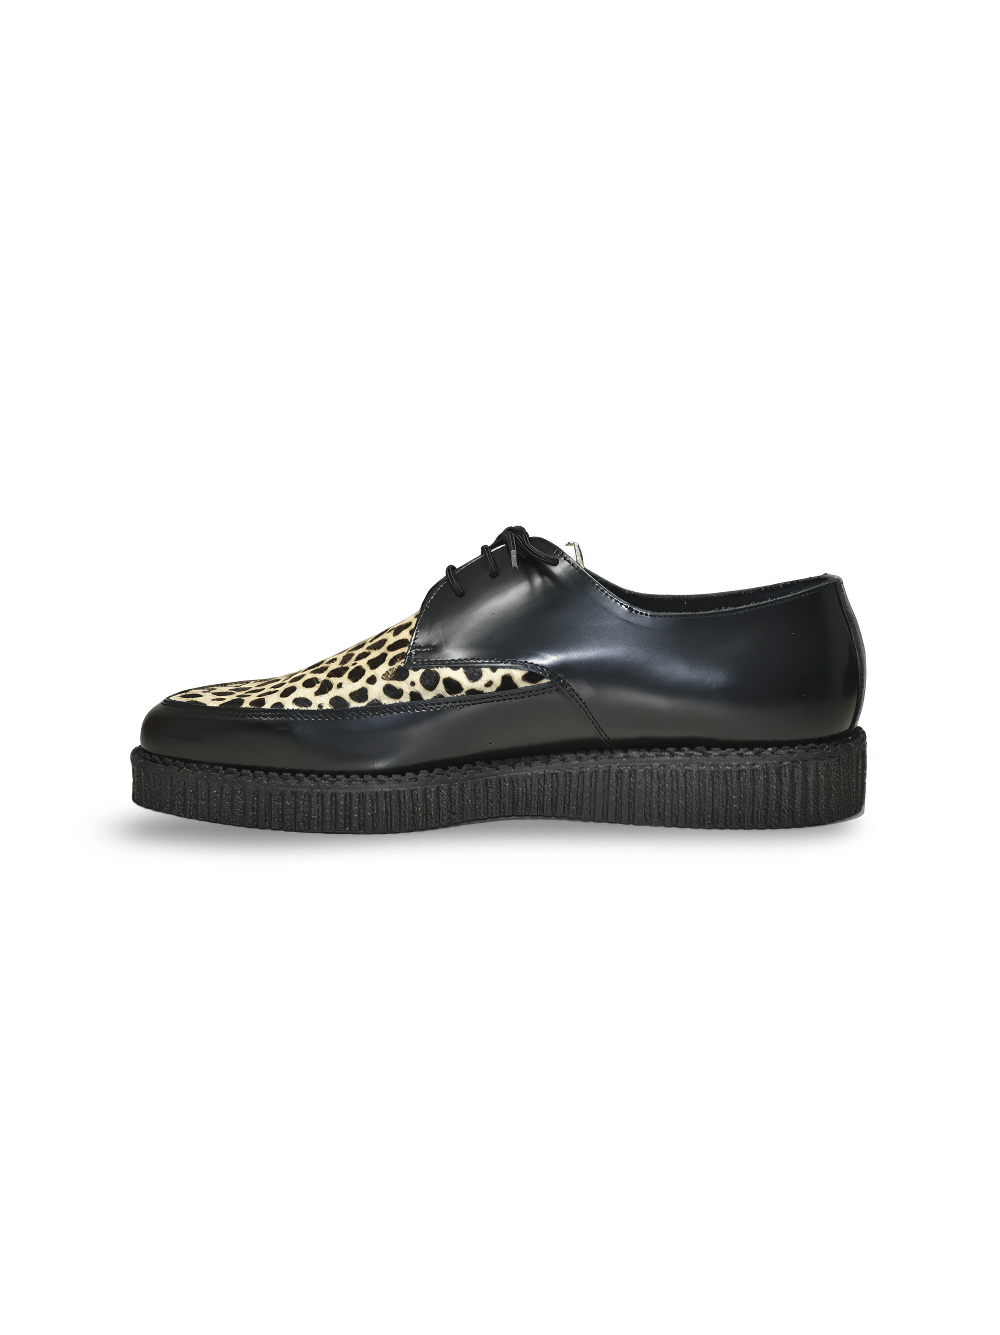 Distinctive Leopard Print Pointed Creepers Shoes in Fur